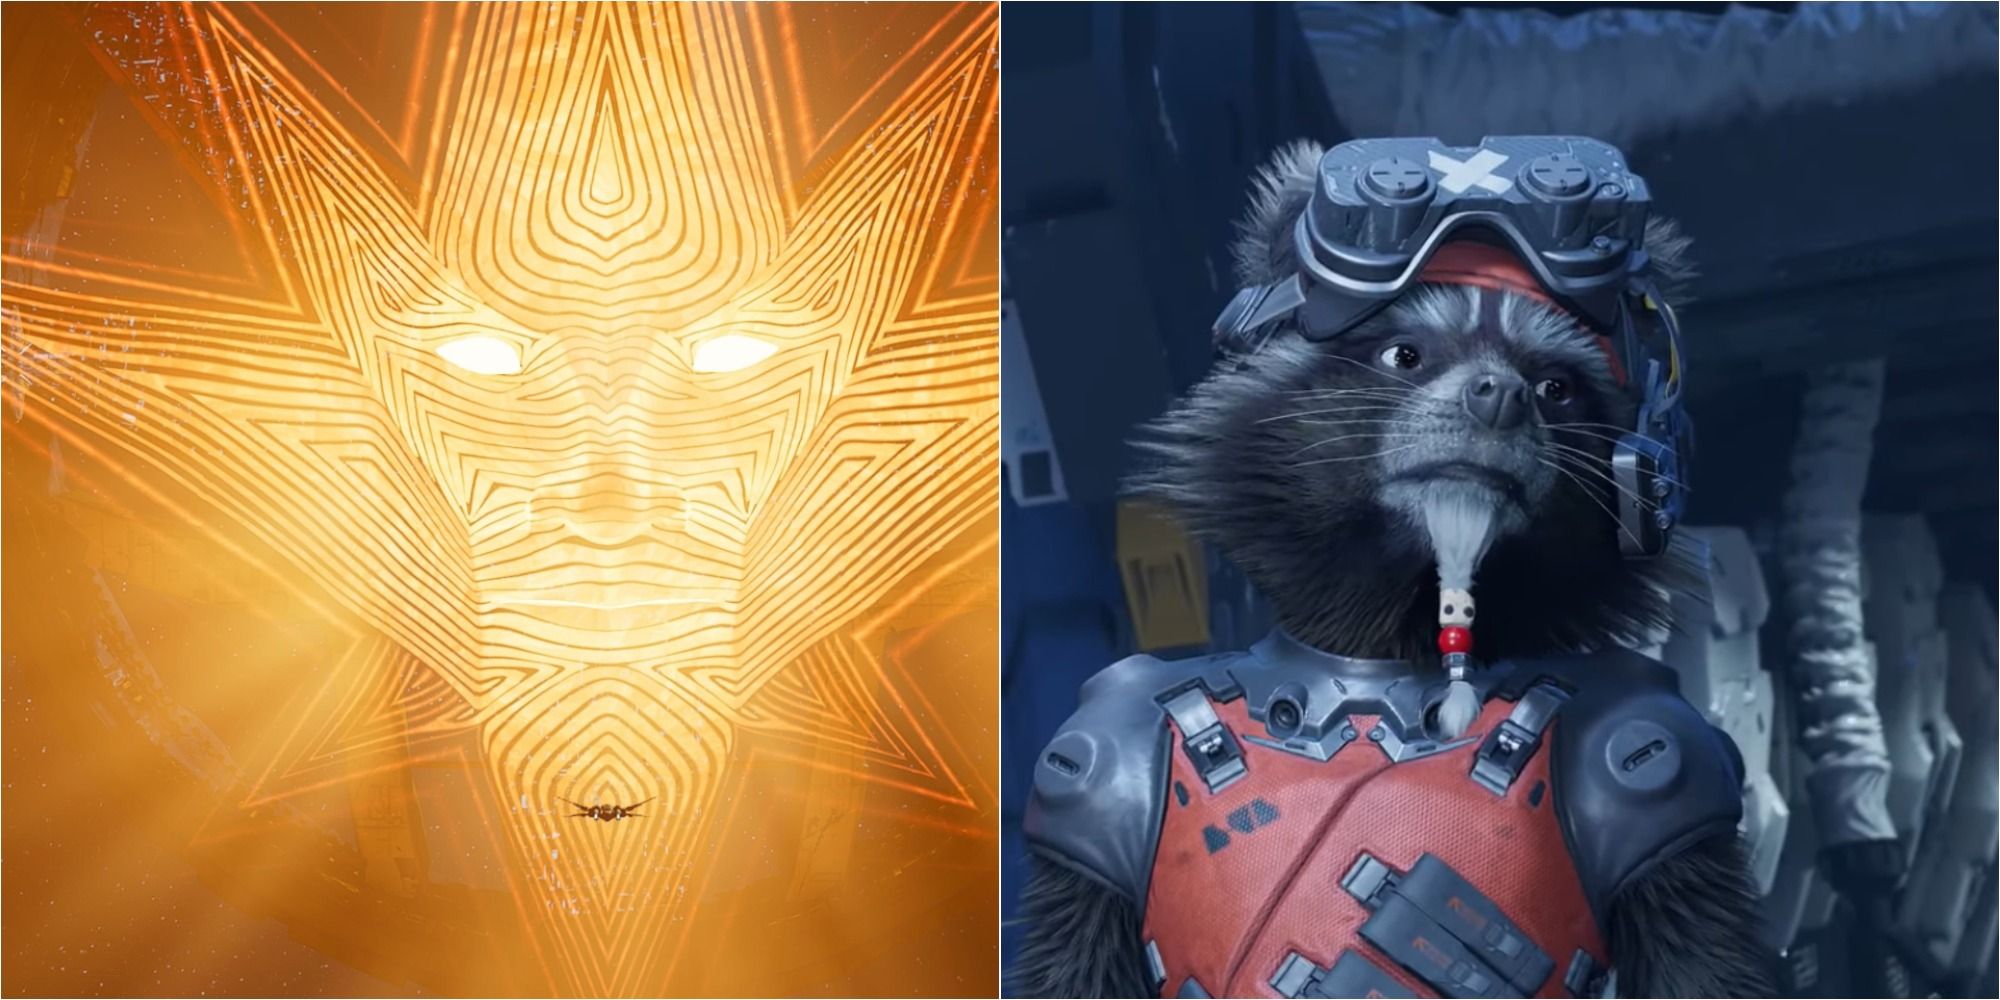 Guardians Of The Galaxy Biggest Choices Featured Split Image Featuring Worldmind and Rocket